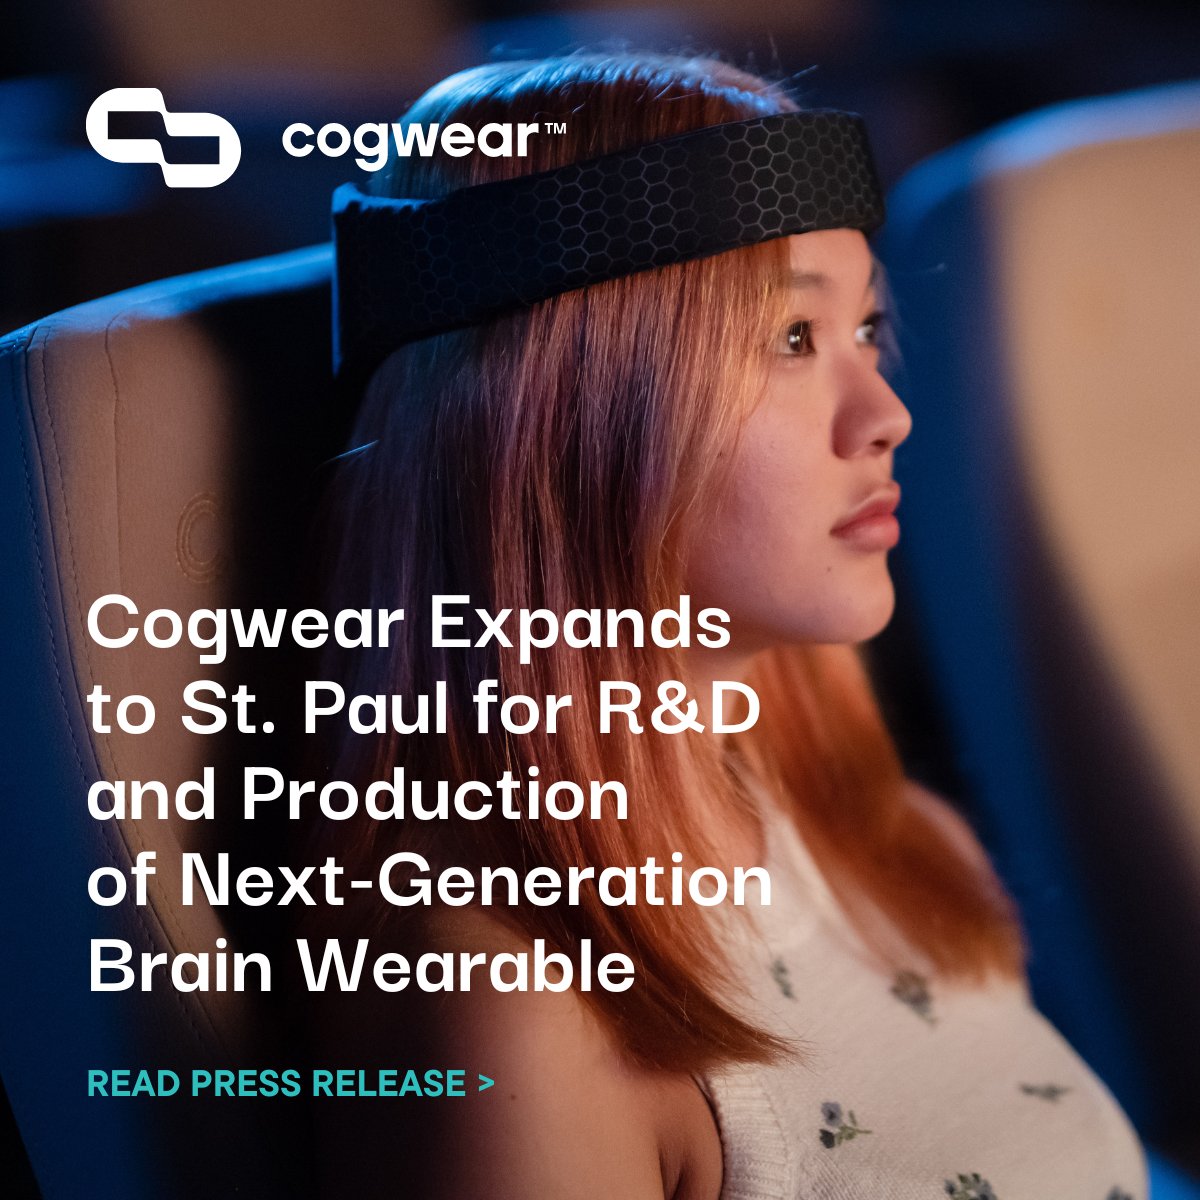 Cogwear Expands to St. Paul for R&D and Production of Brain Wearable: medicalalley.org/cogwear-expand…